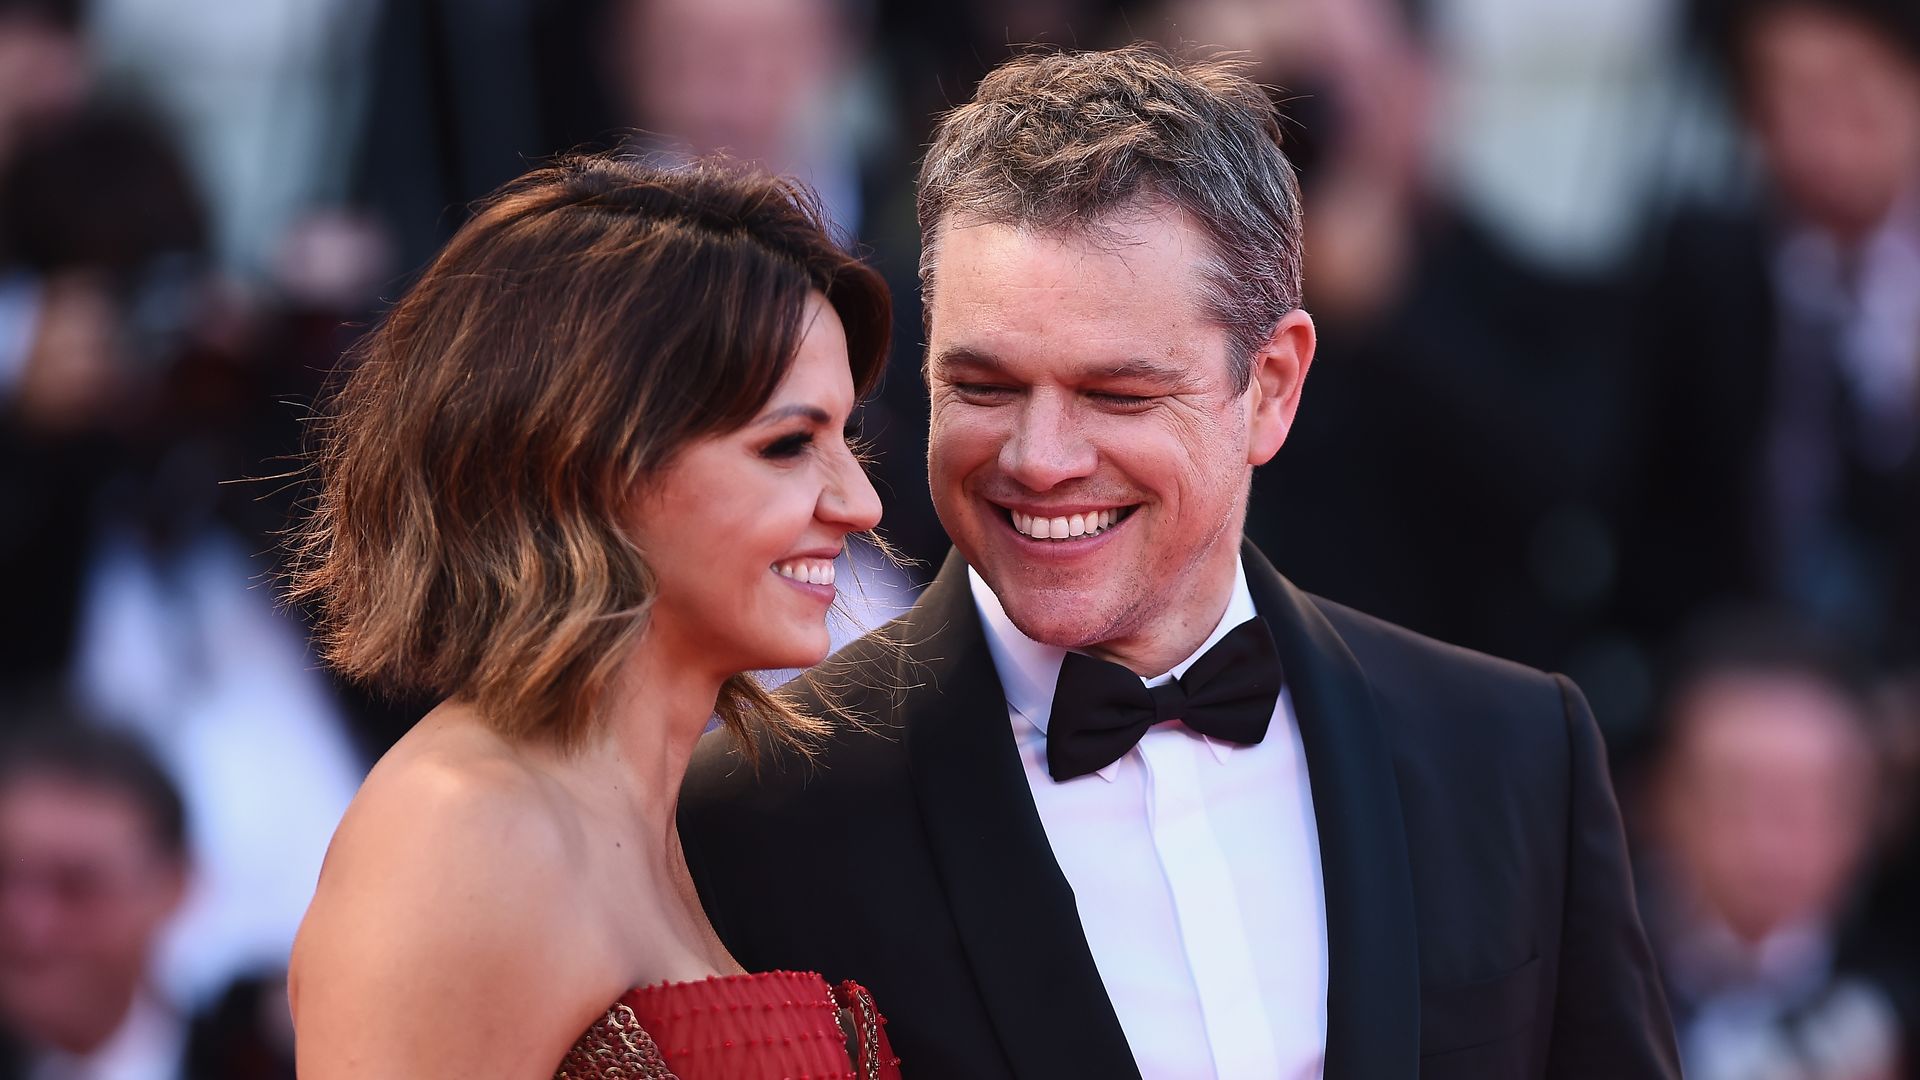 Luciana Damon and Matt Damon walk the red carpet ahead of the 'Downsizing' screening and Opening Ceremony during the 74th Venice Film Festival at Sala Grande on August 30, 2017 in Venice, Italy.